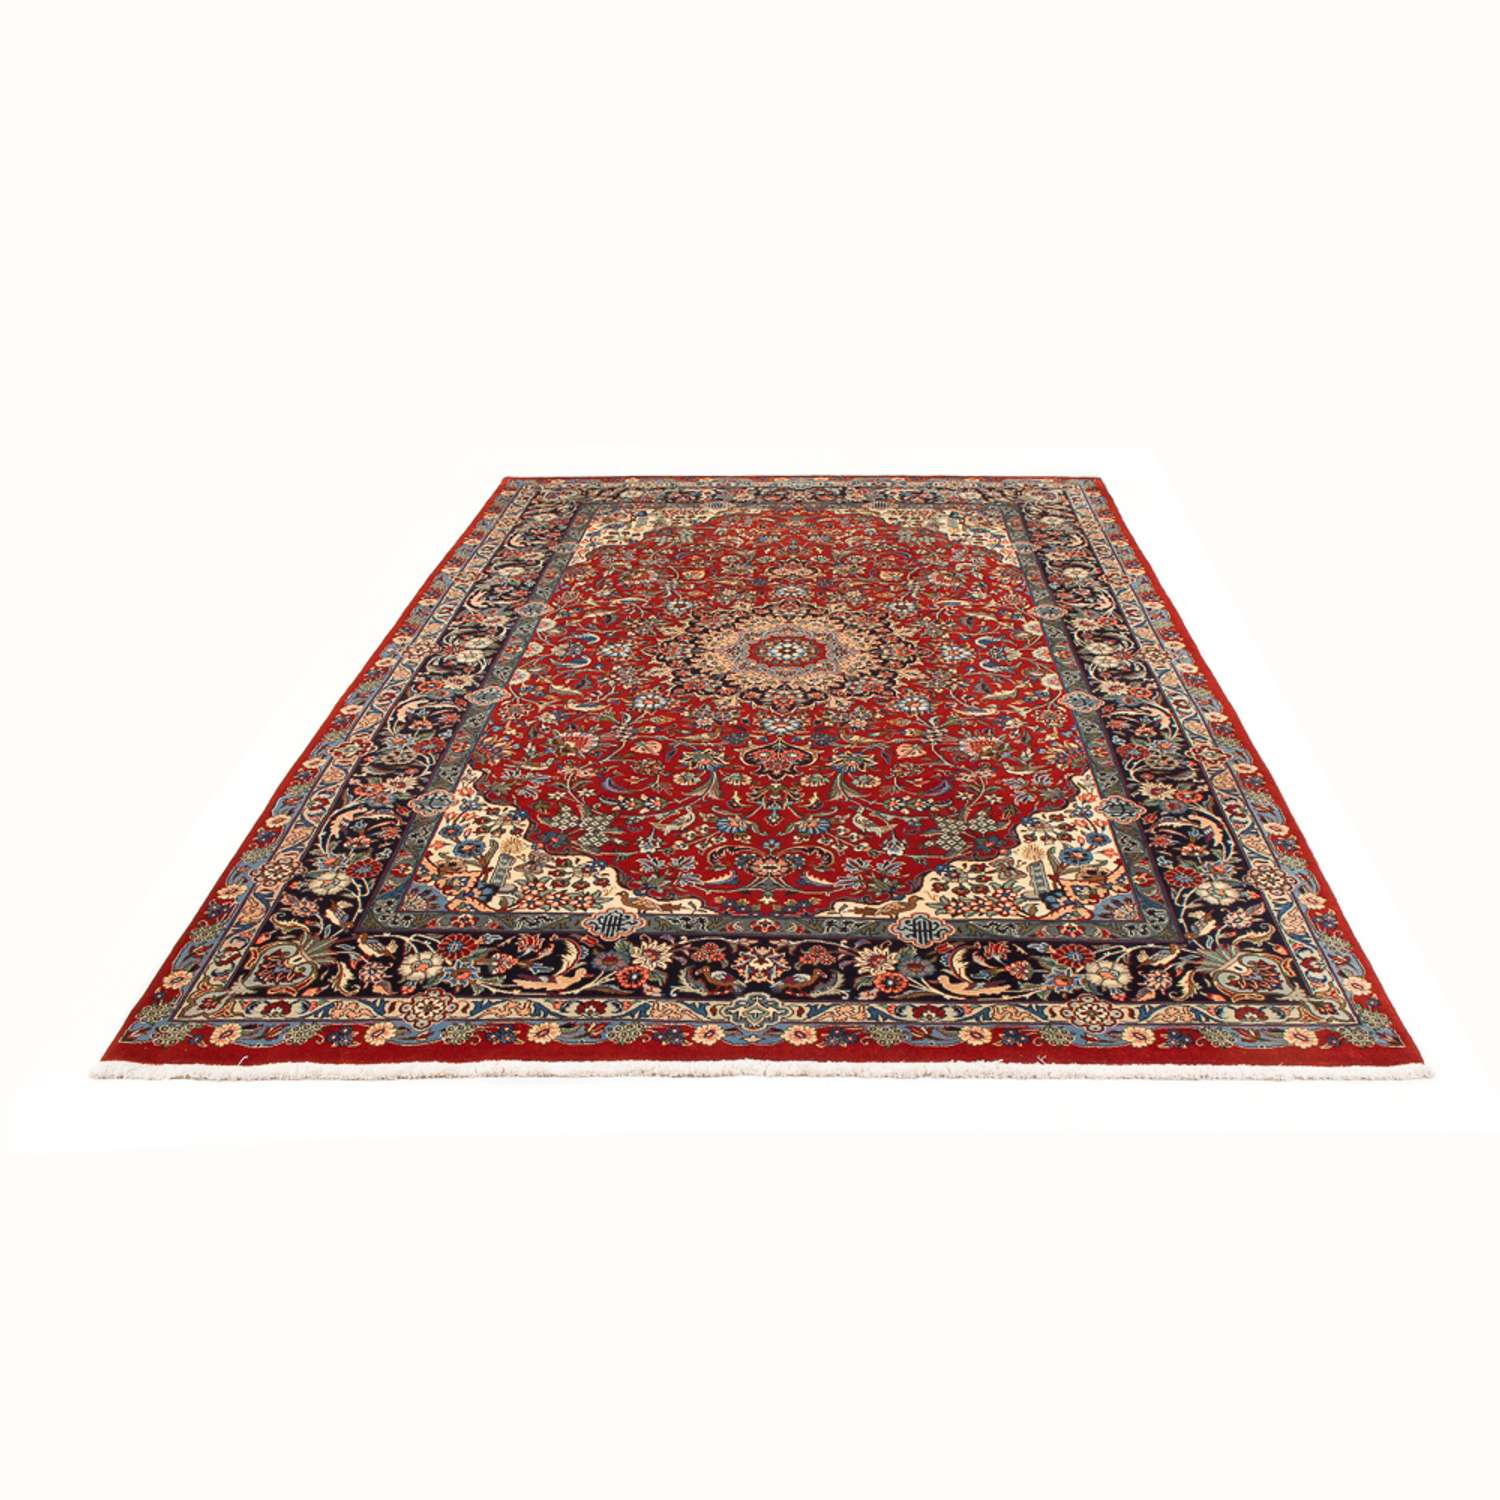 Perser Rug - Classic - 286 x 196 cm - red